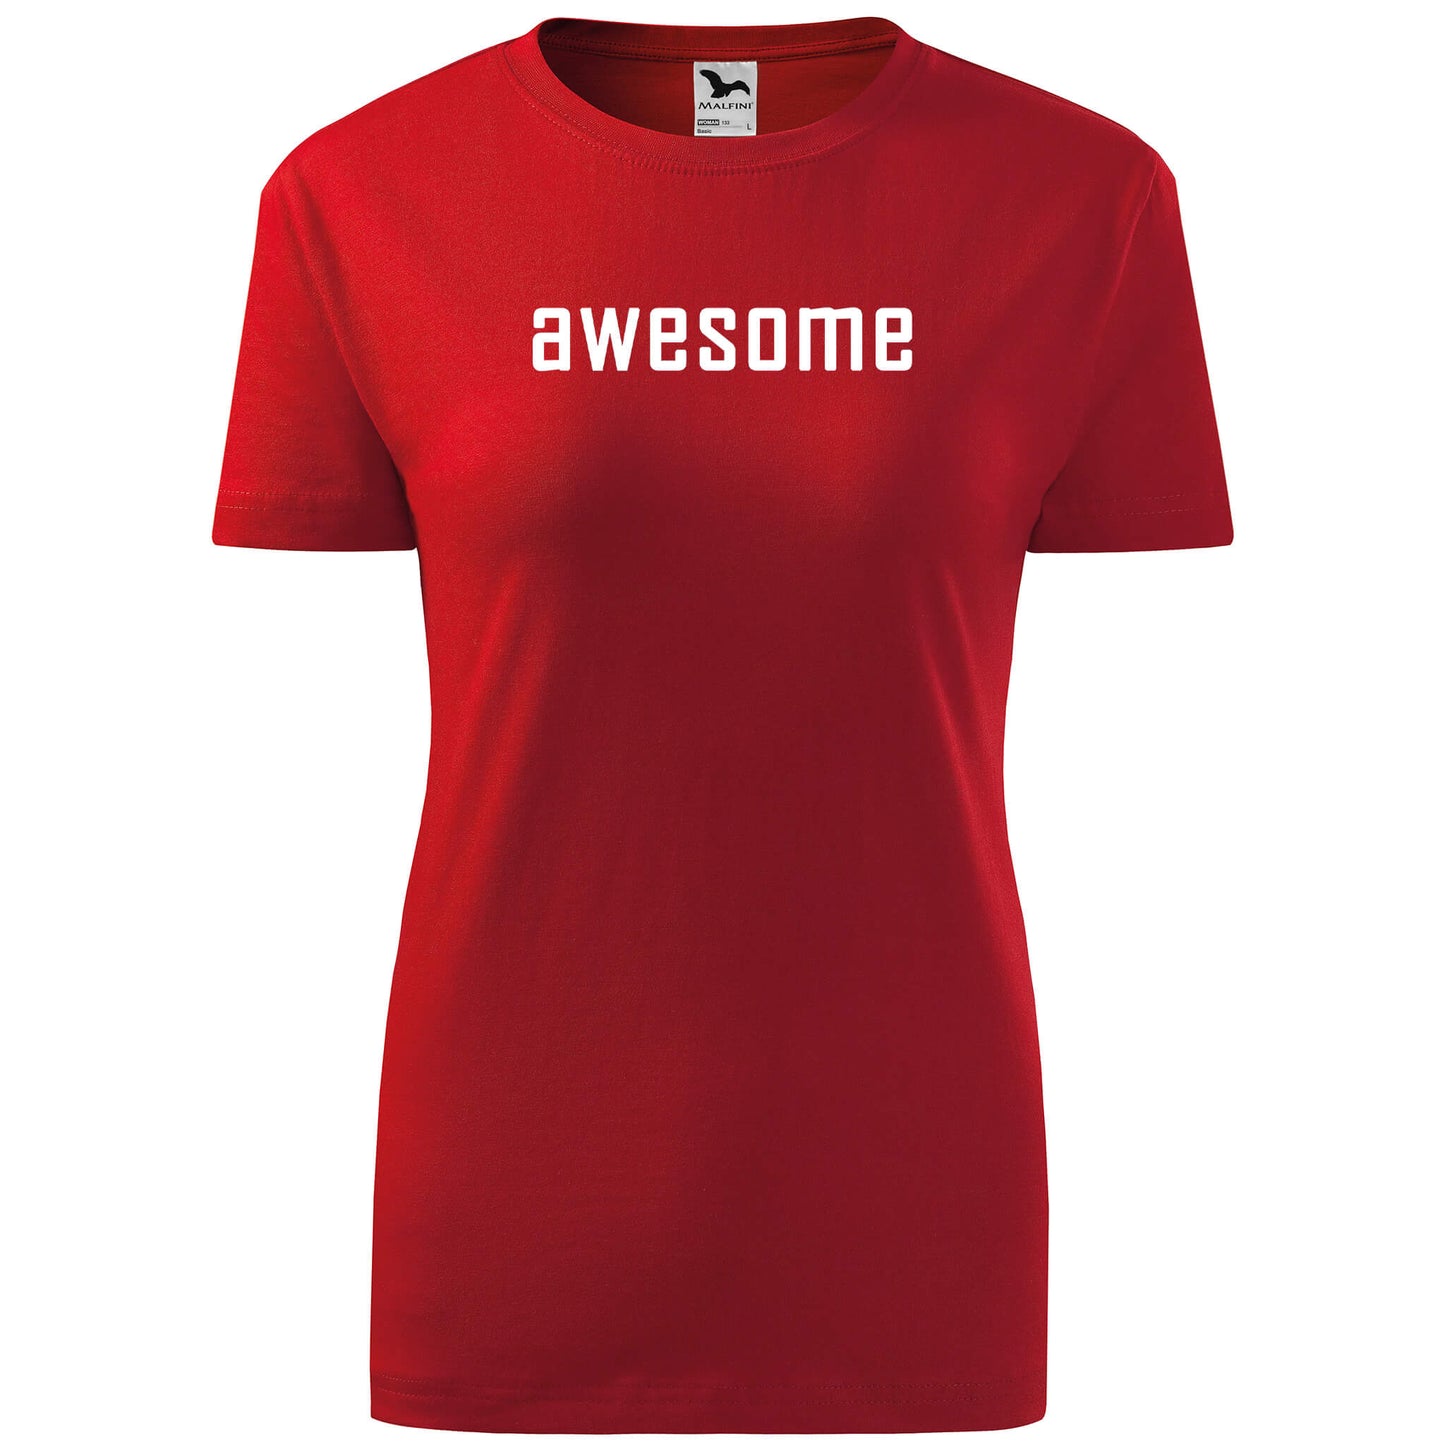 T-shirt - awesome - rvdesignprint